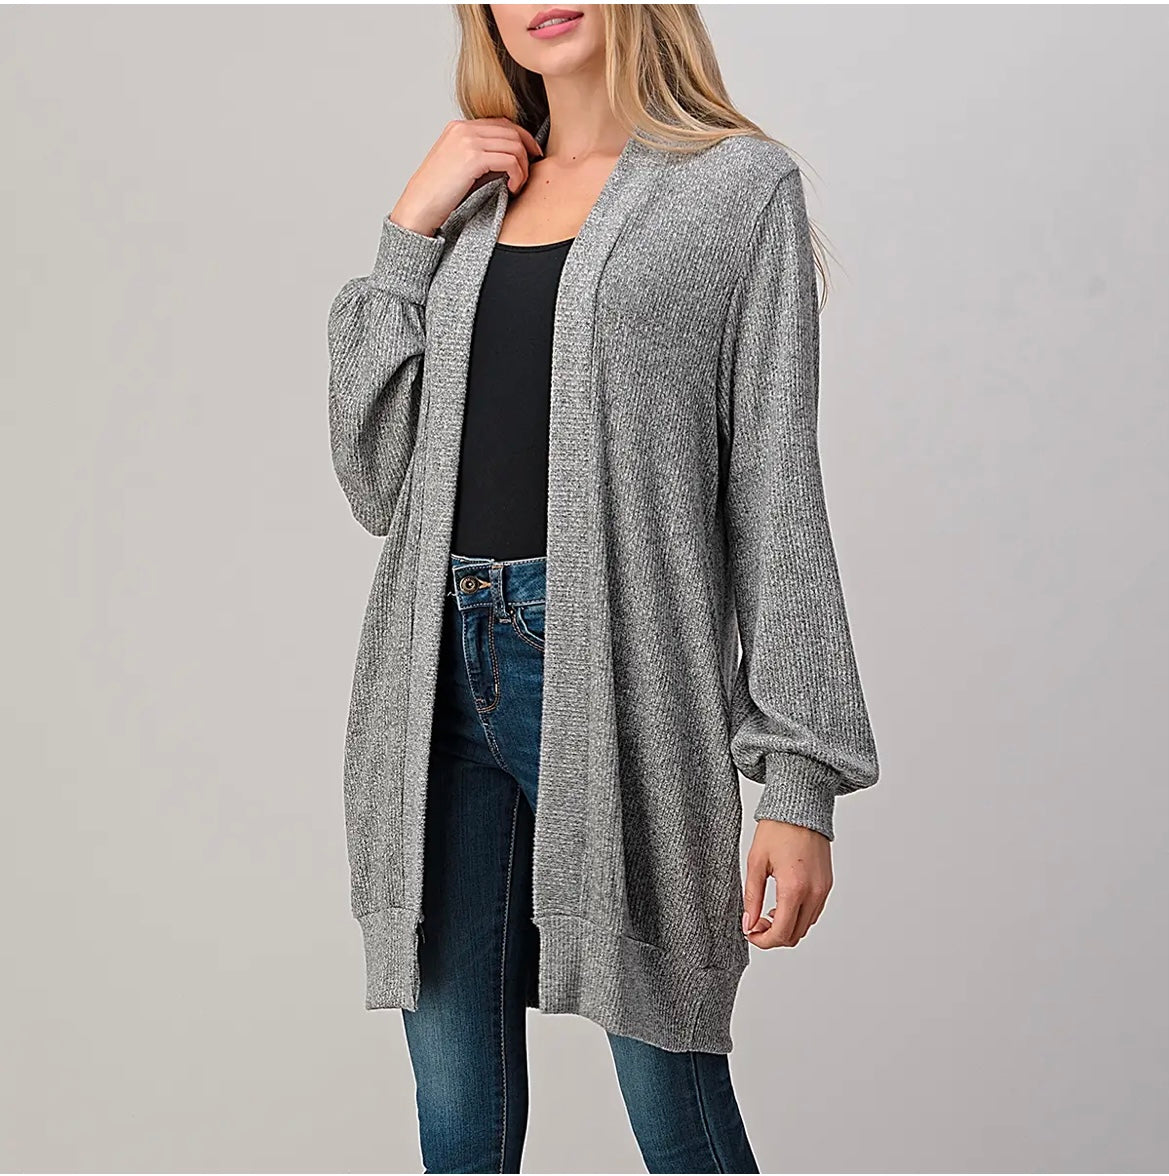 NV - The J Bubble Longsleeve Cardigan with pockets ;)